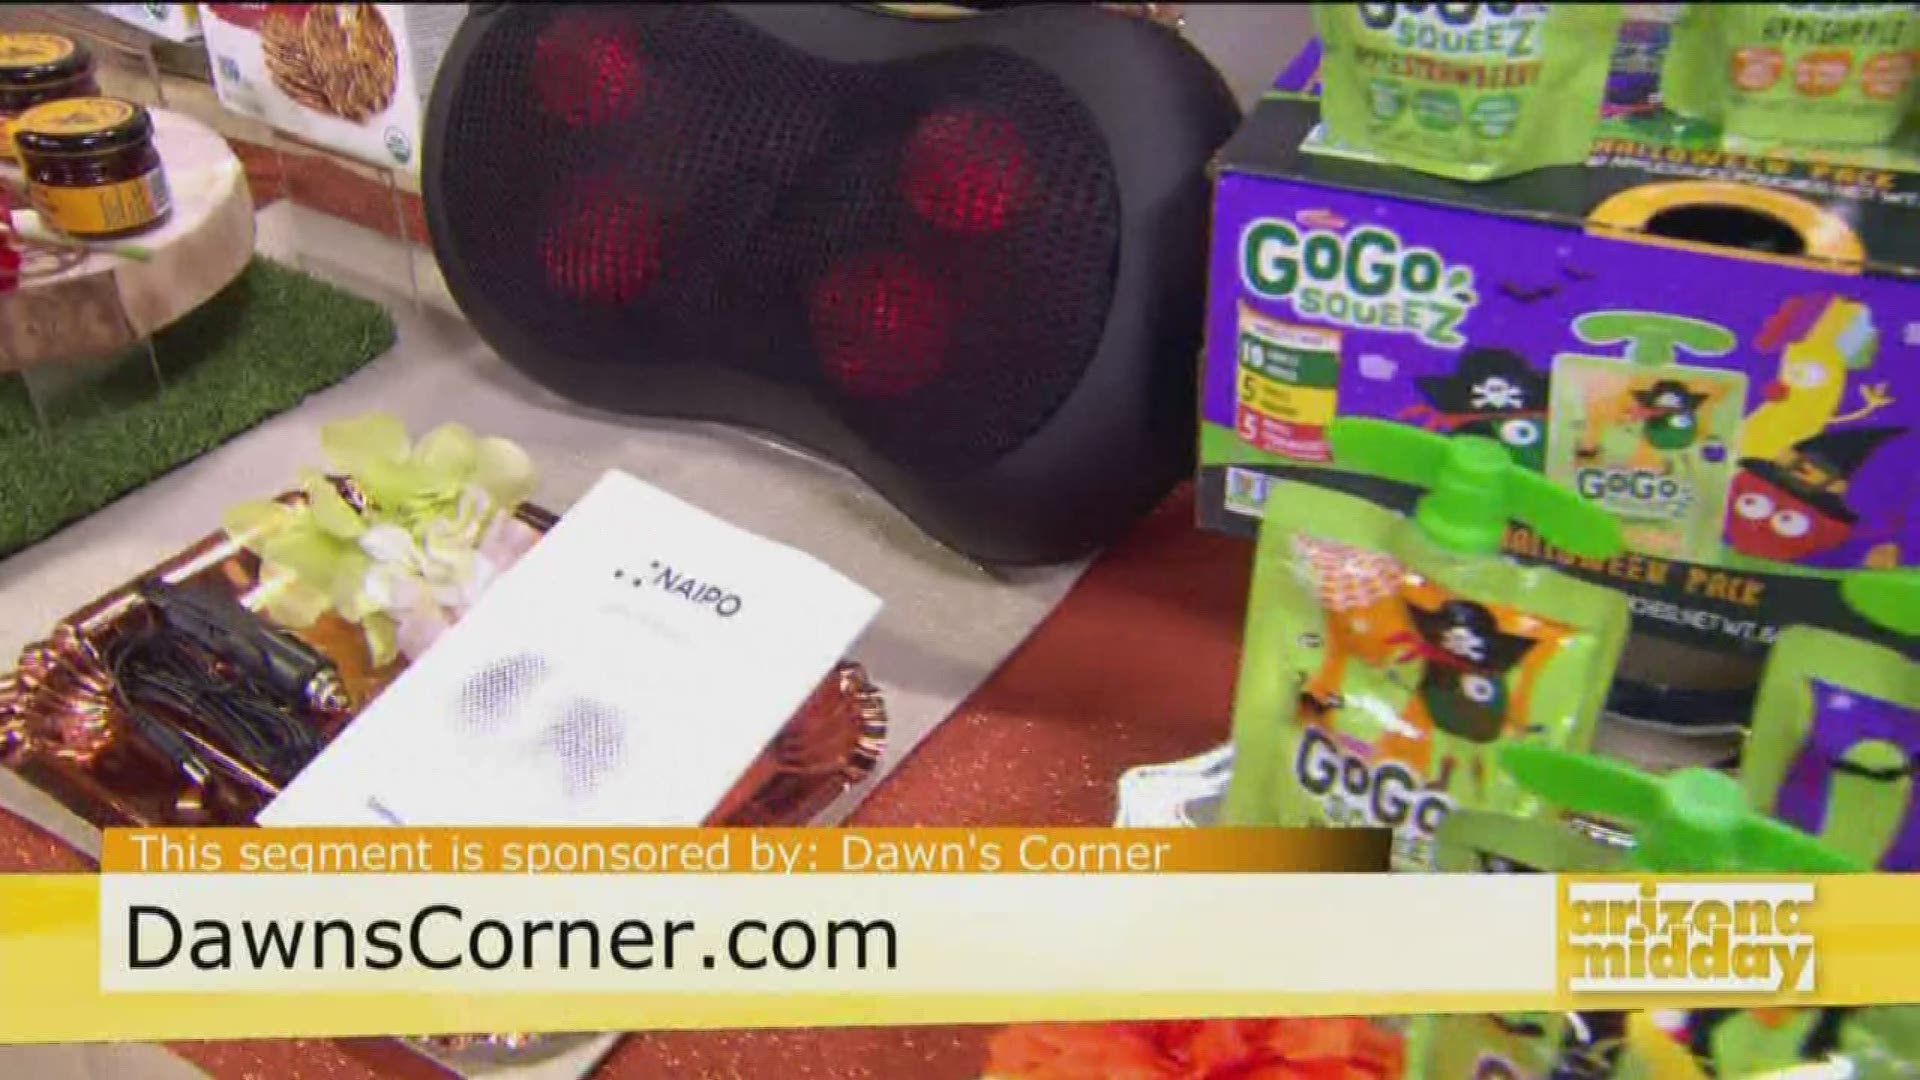 Dawn from Dawn's Corner gives us the scoop on all the hot fall products from portable car massagers to furry blankets!